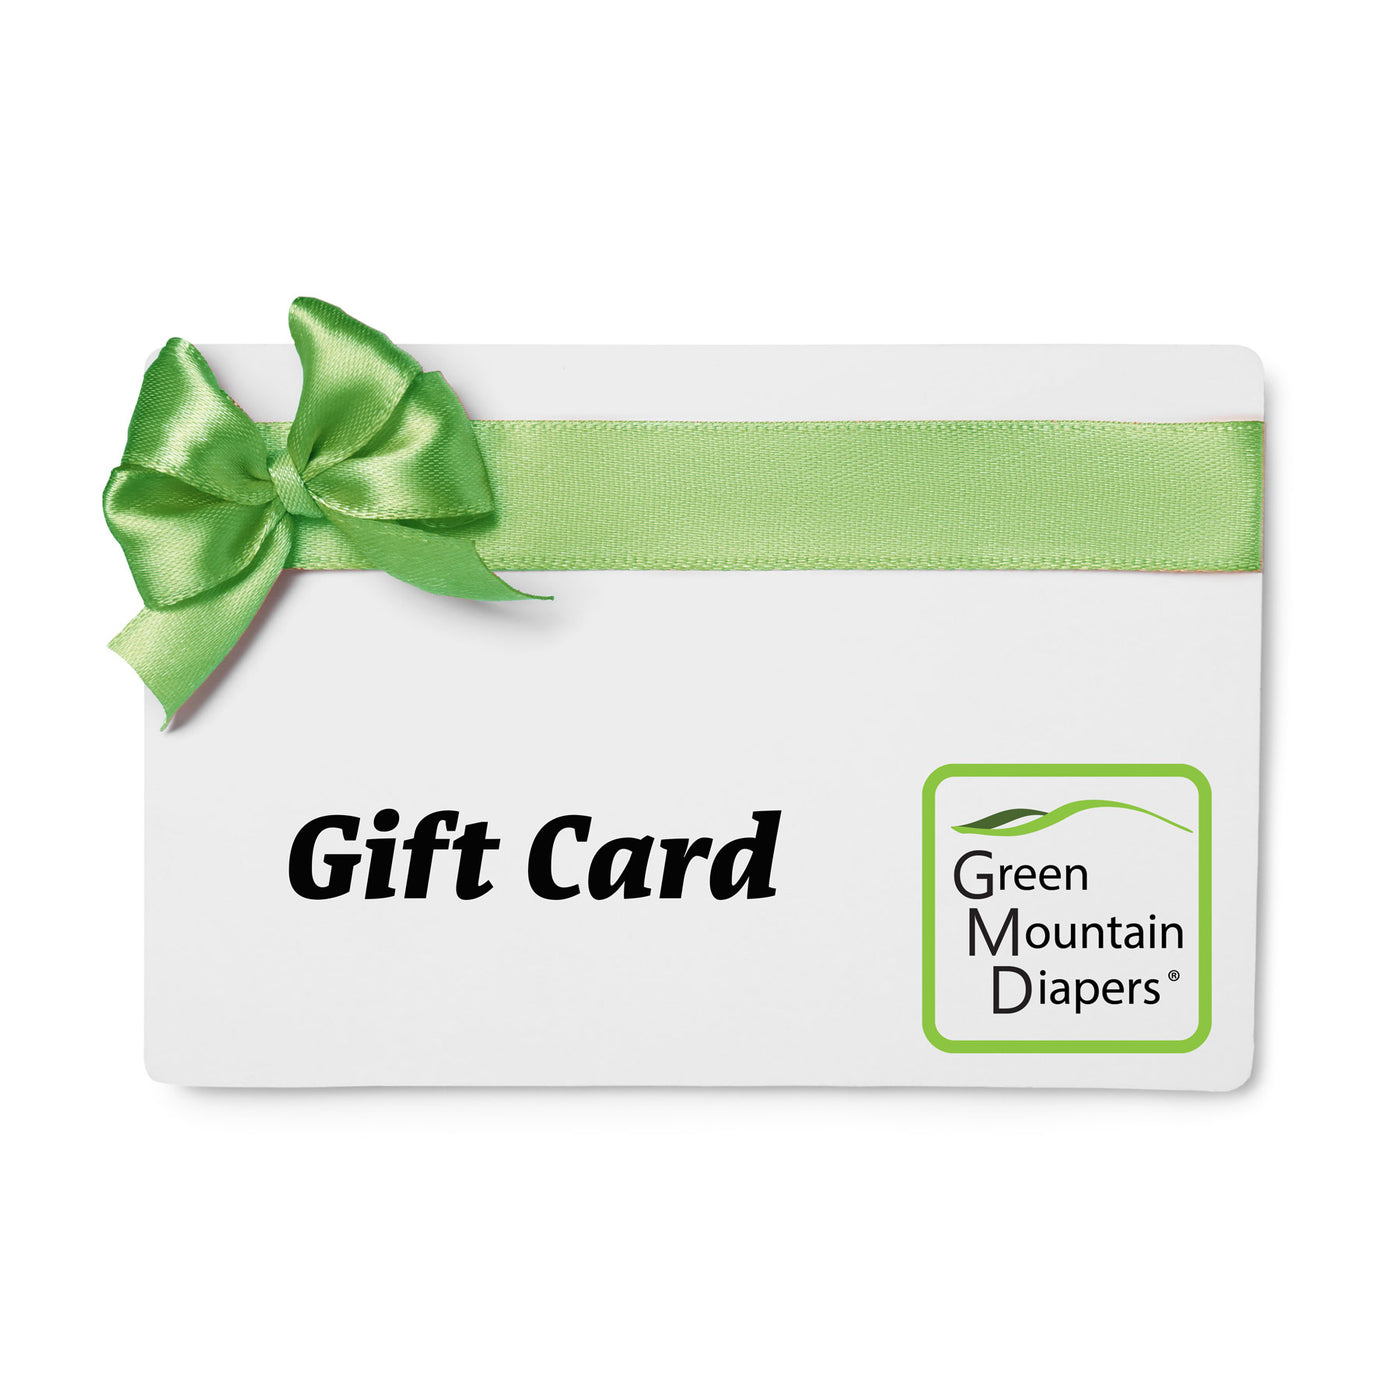 Green Mountain Diapers gift card gift certificate